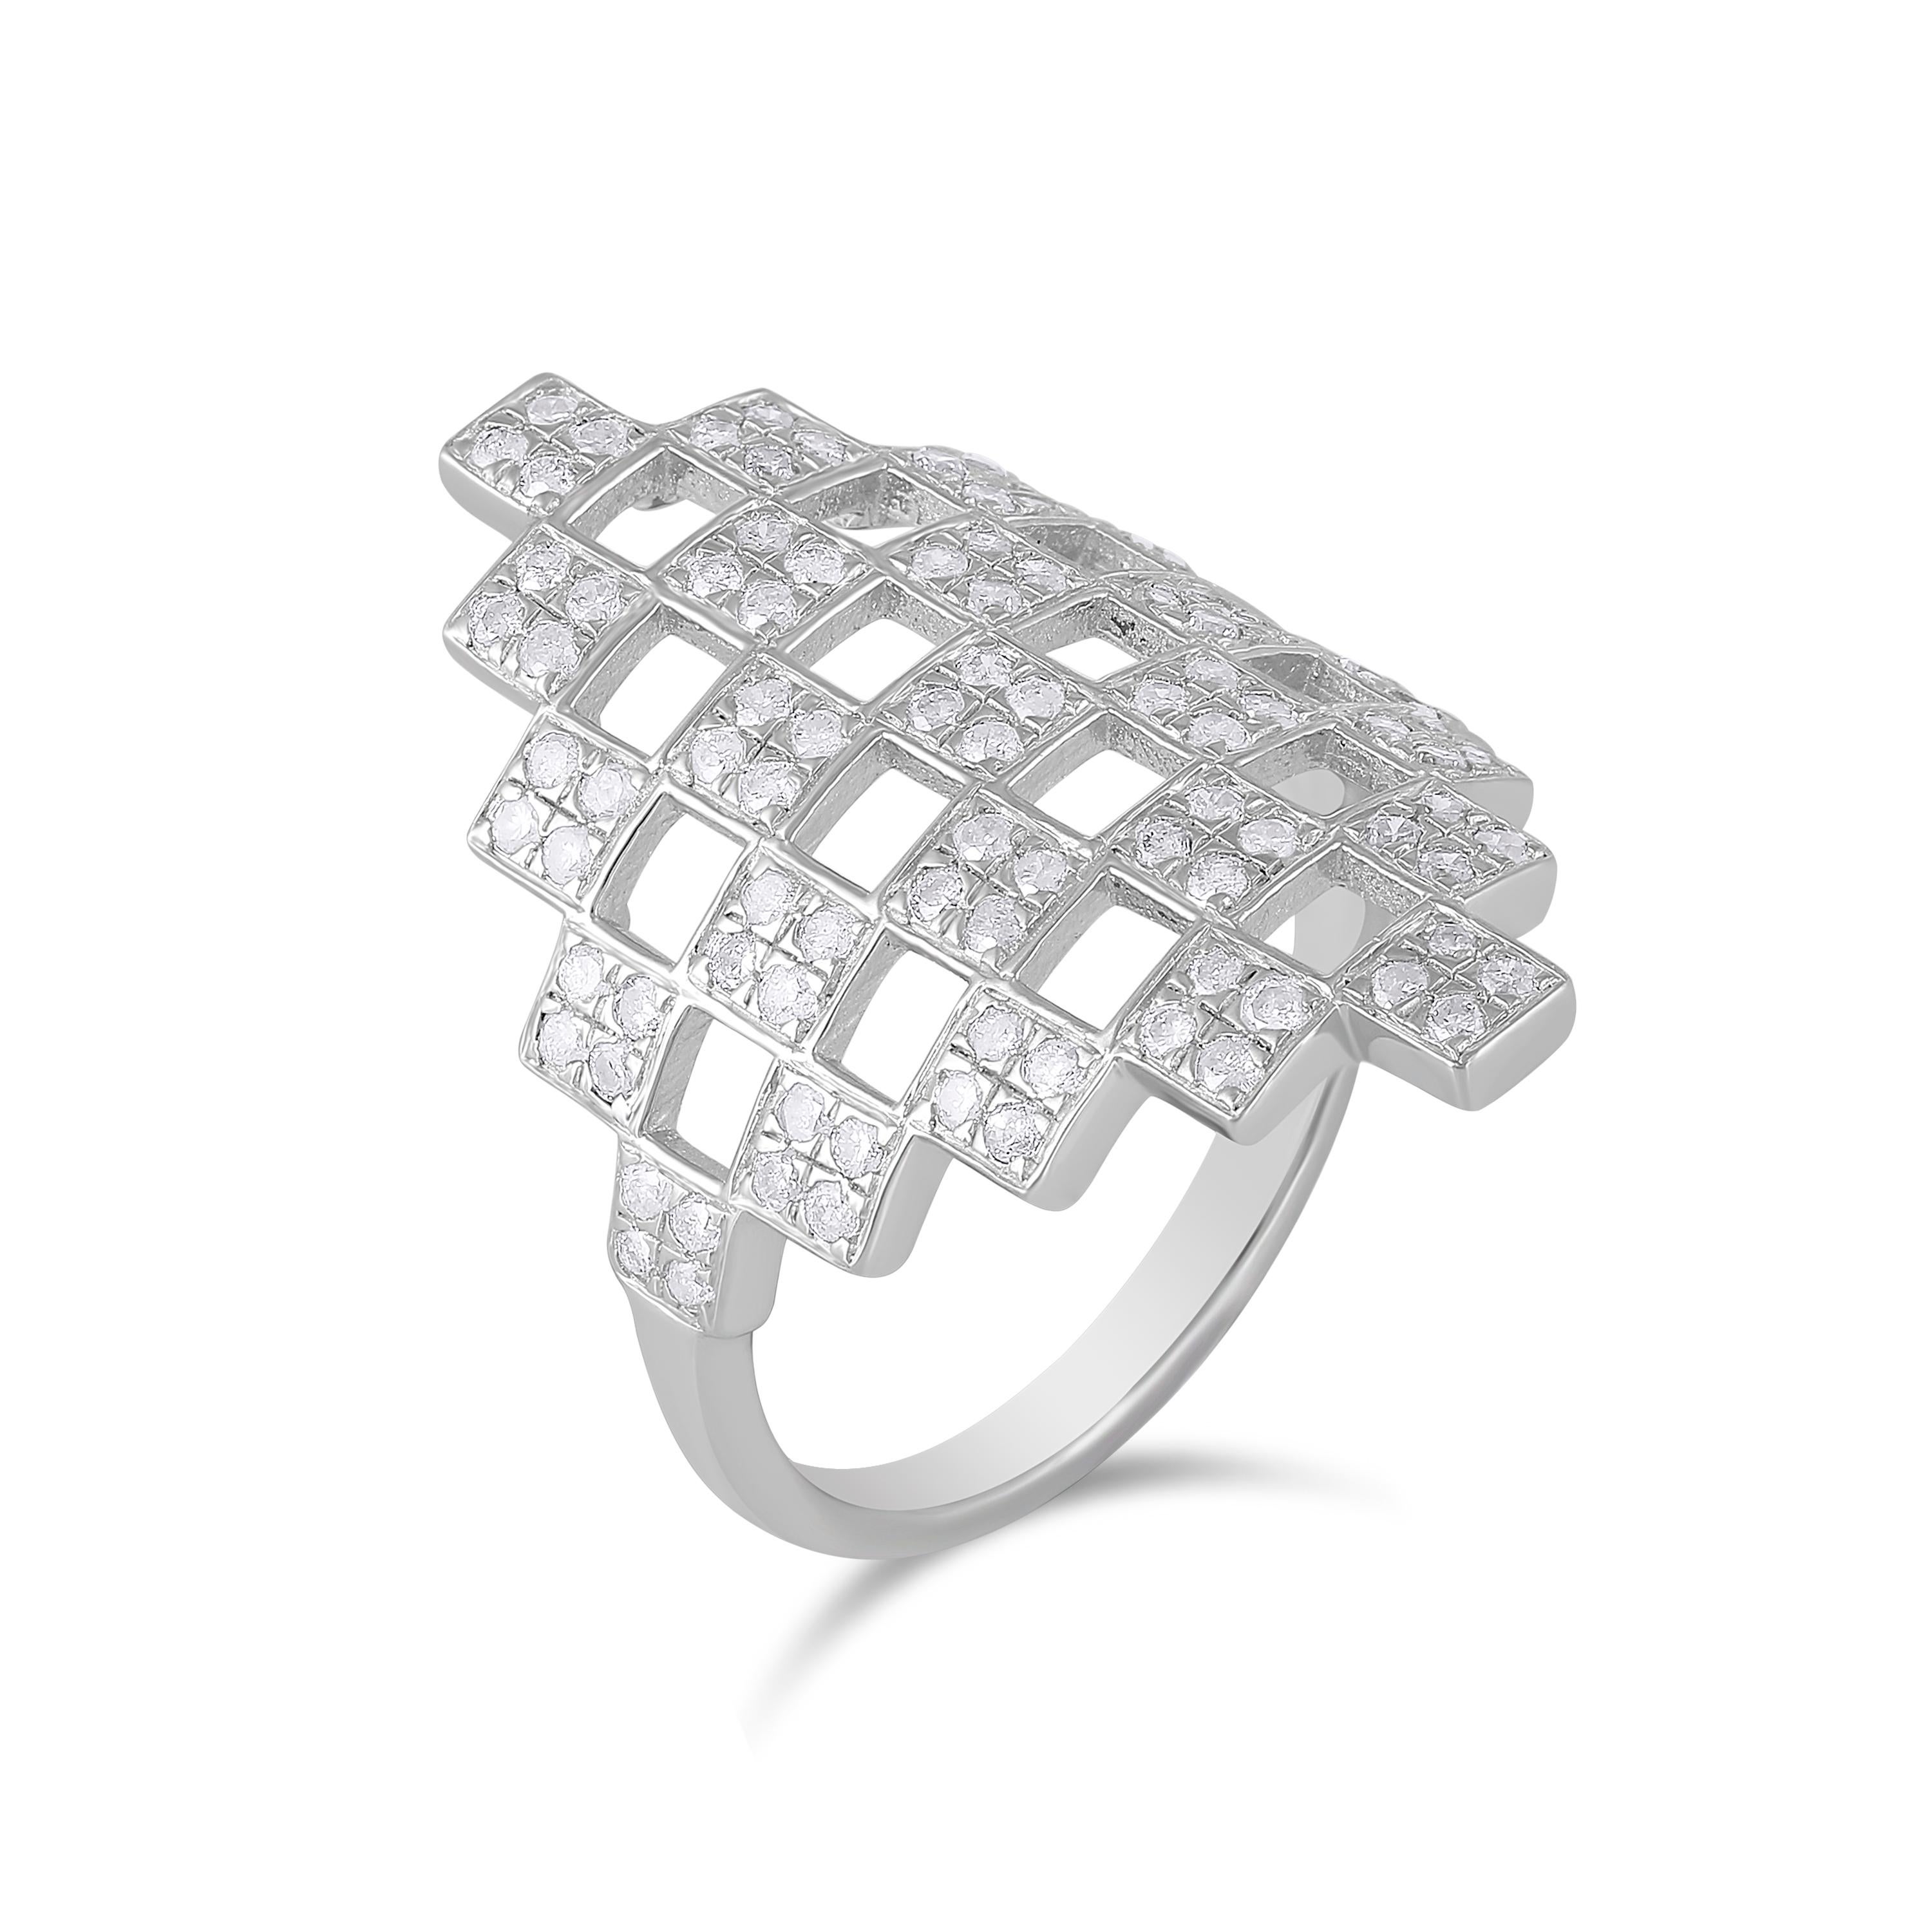 Round Cut Gemistry 0.88 Carat T.W. Diamond Freeform Latice Ring in 925 Sterling Silver For Sale